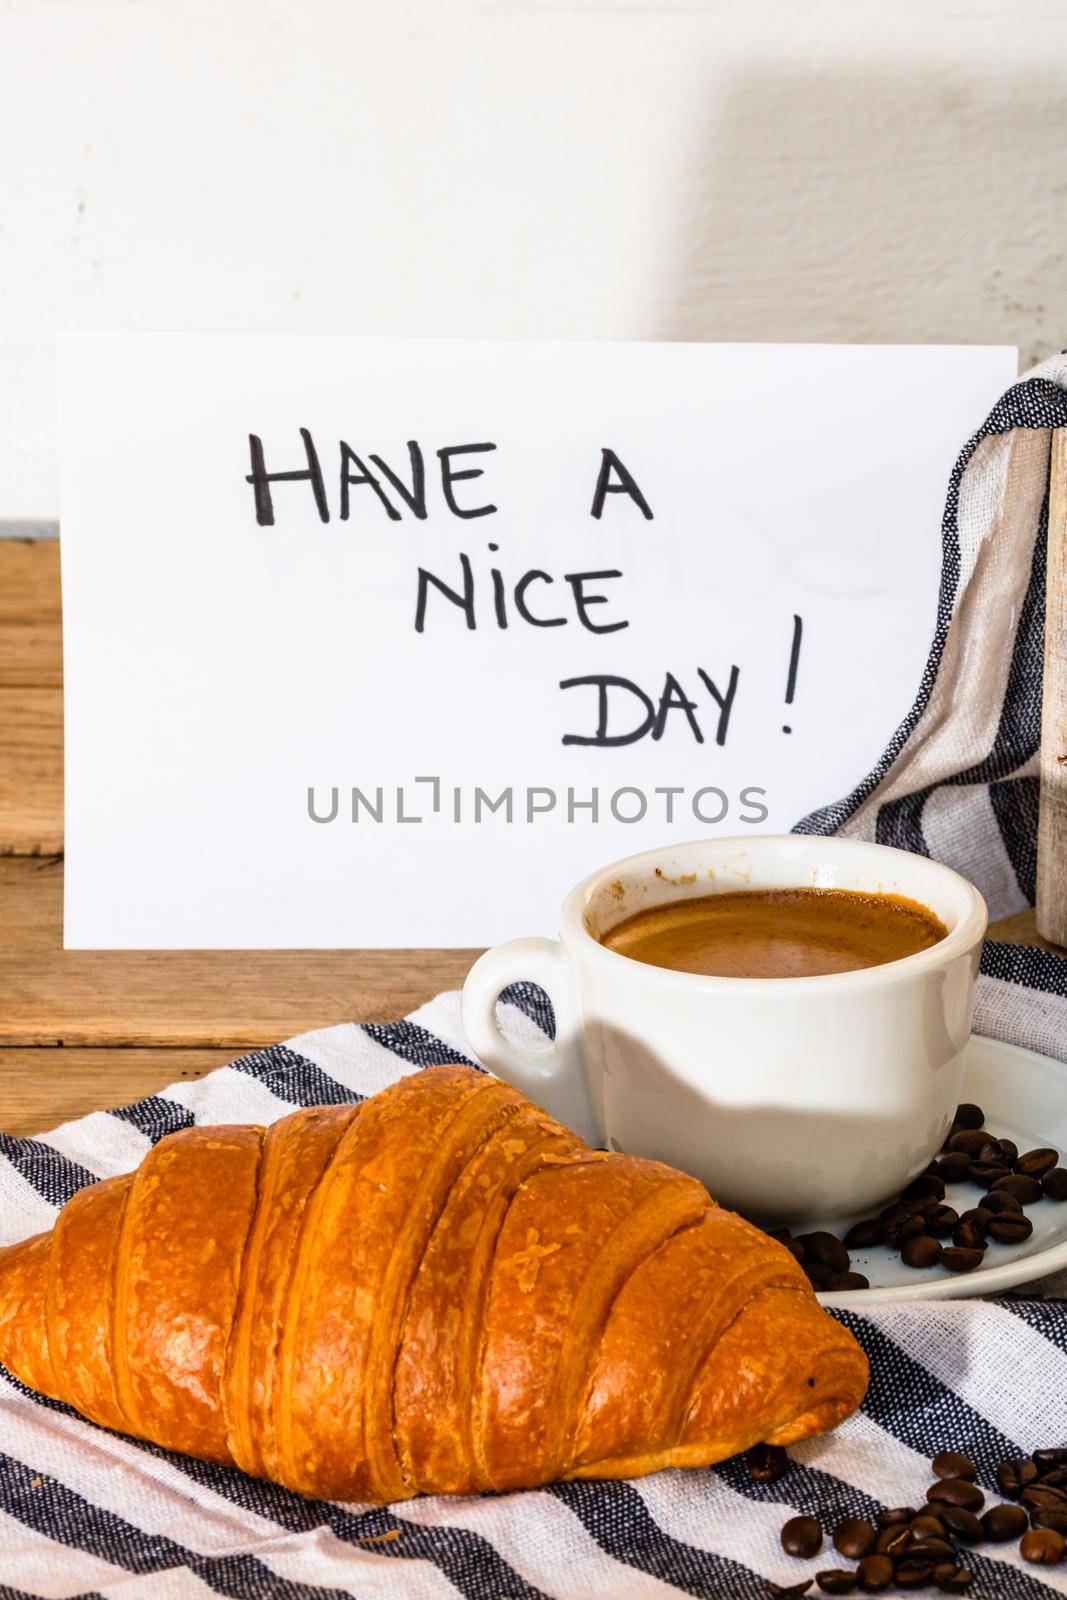 Coffee cup and buttered fresh French croissant on wooden crate. Food and breakfast concept. Morning message “have a nice day” o white board